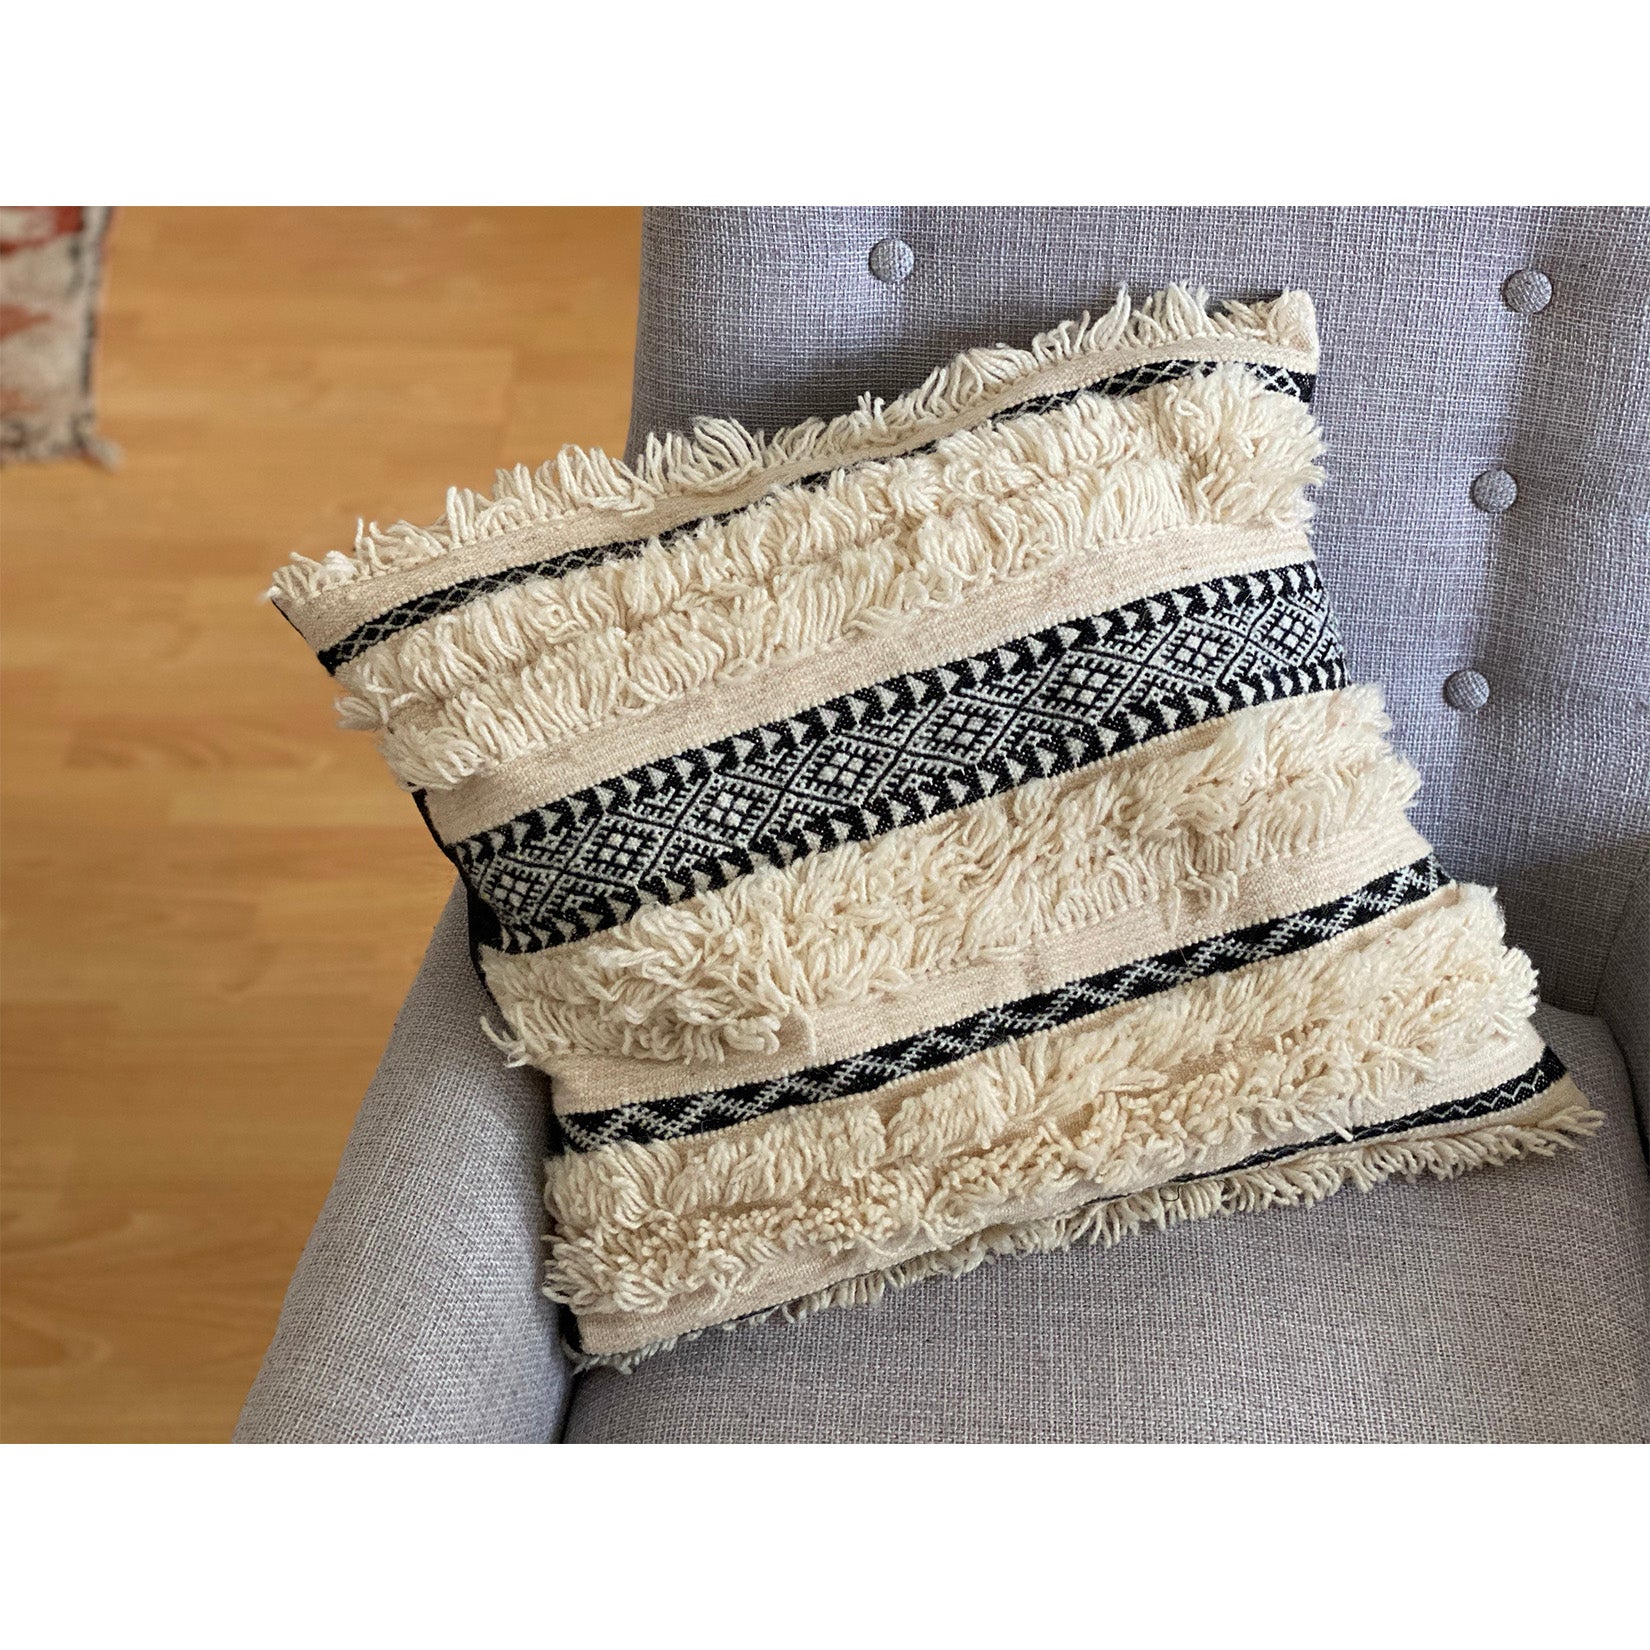 Moroccan pillow inspired by Moroccan wedding blanket in black and white and tufted bands